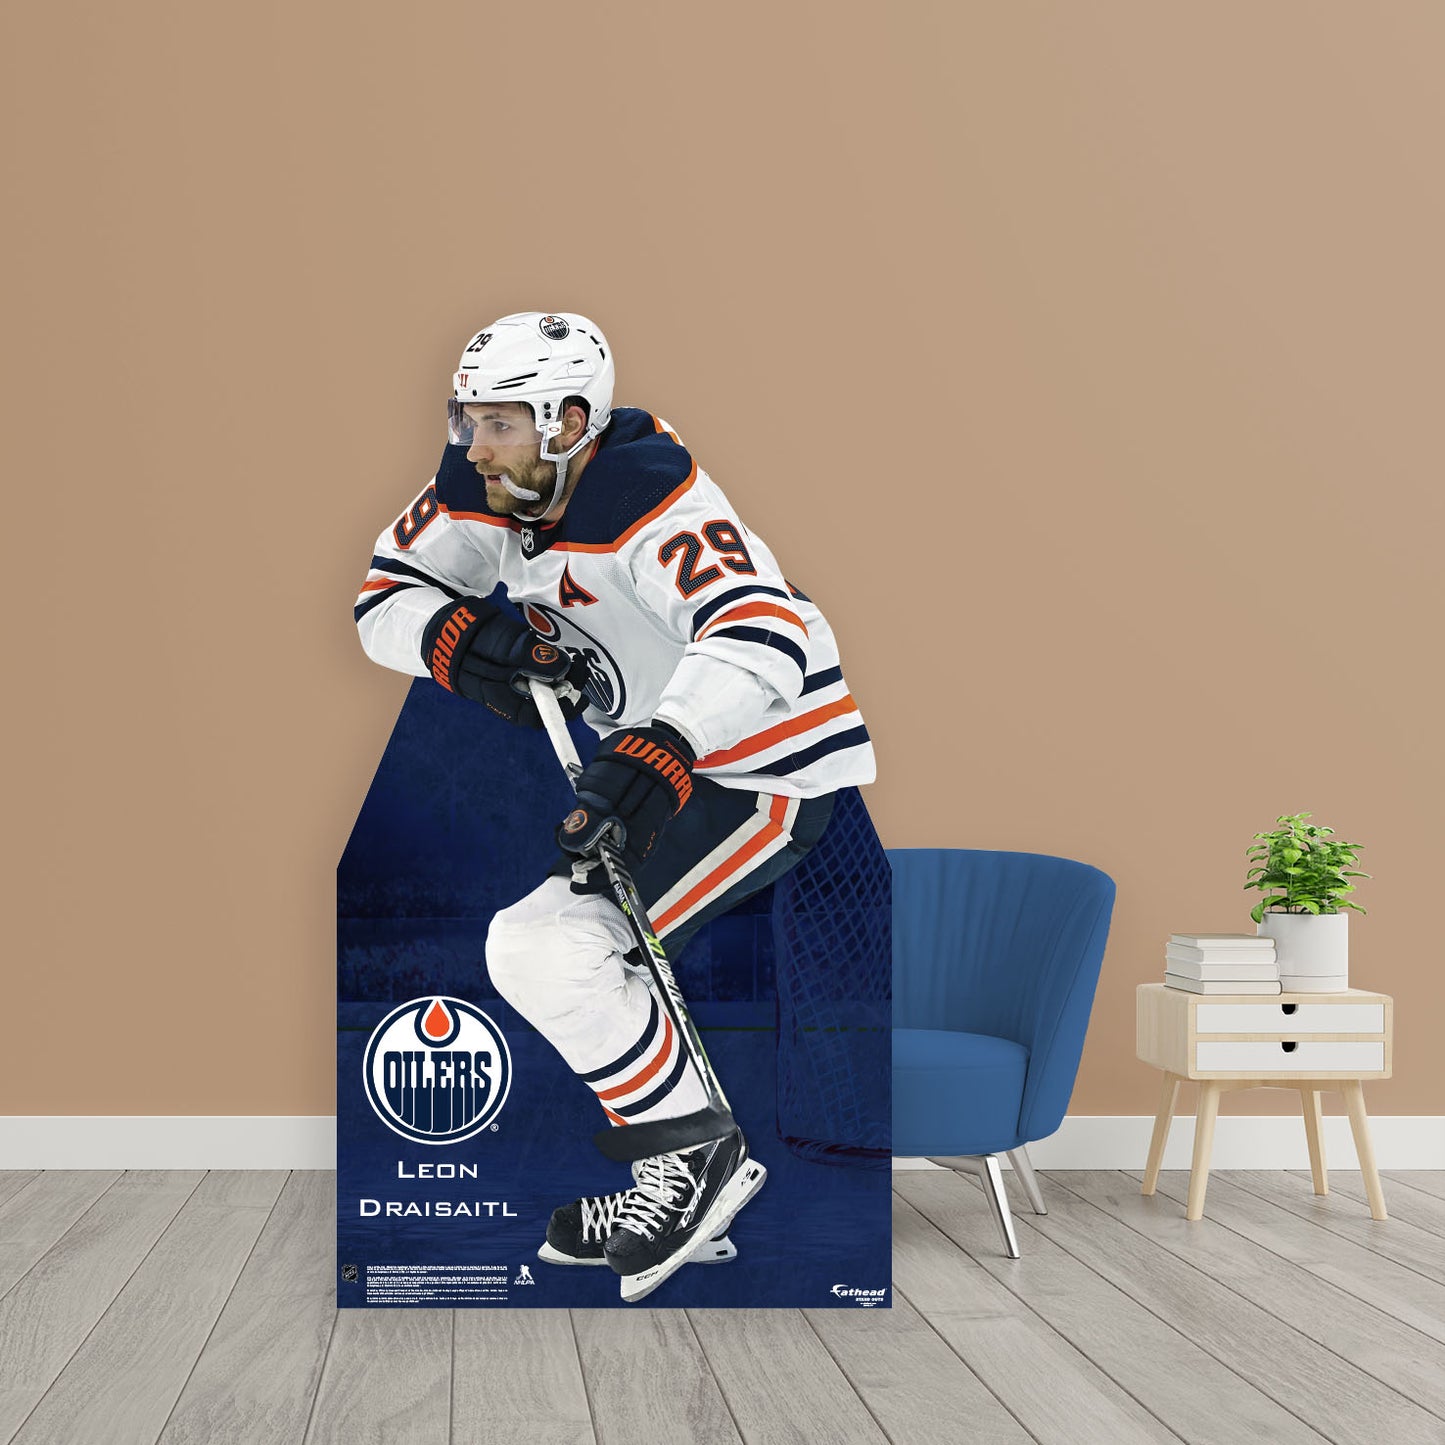 Edmonton Oilers: Leon Draisaitl   Life-Size   Foam Core Cutout  - Officially Licensed NHL    Stand Out